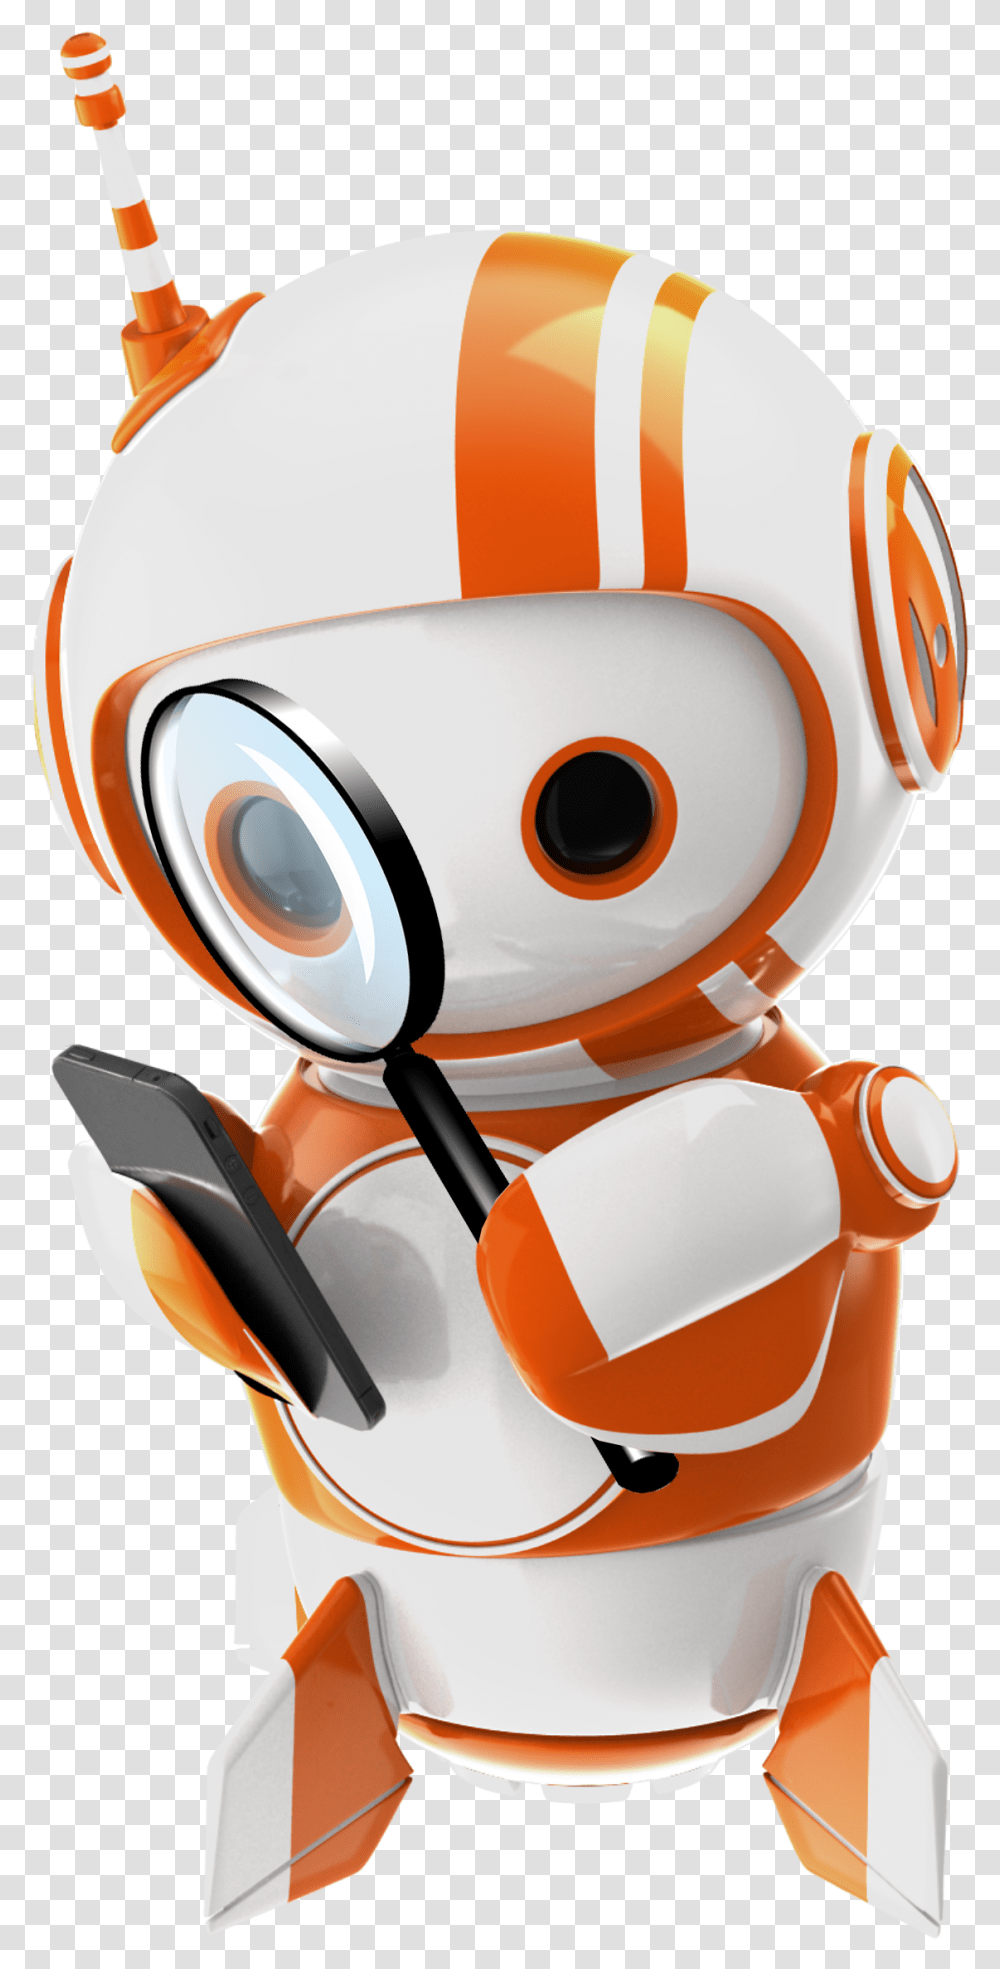 Don't Take The Call Telephone Imposter Scams On The Logix Robot, Helmet, Apparel, Electronics Transparent Png